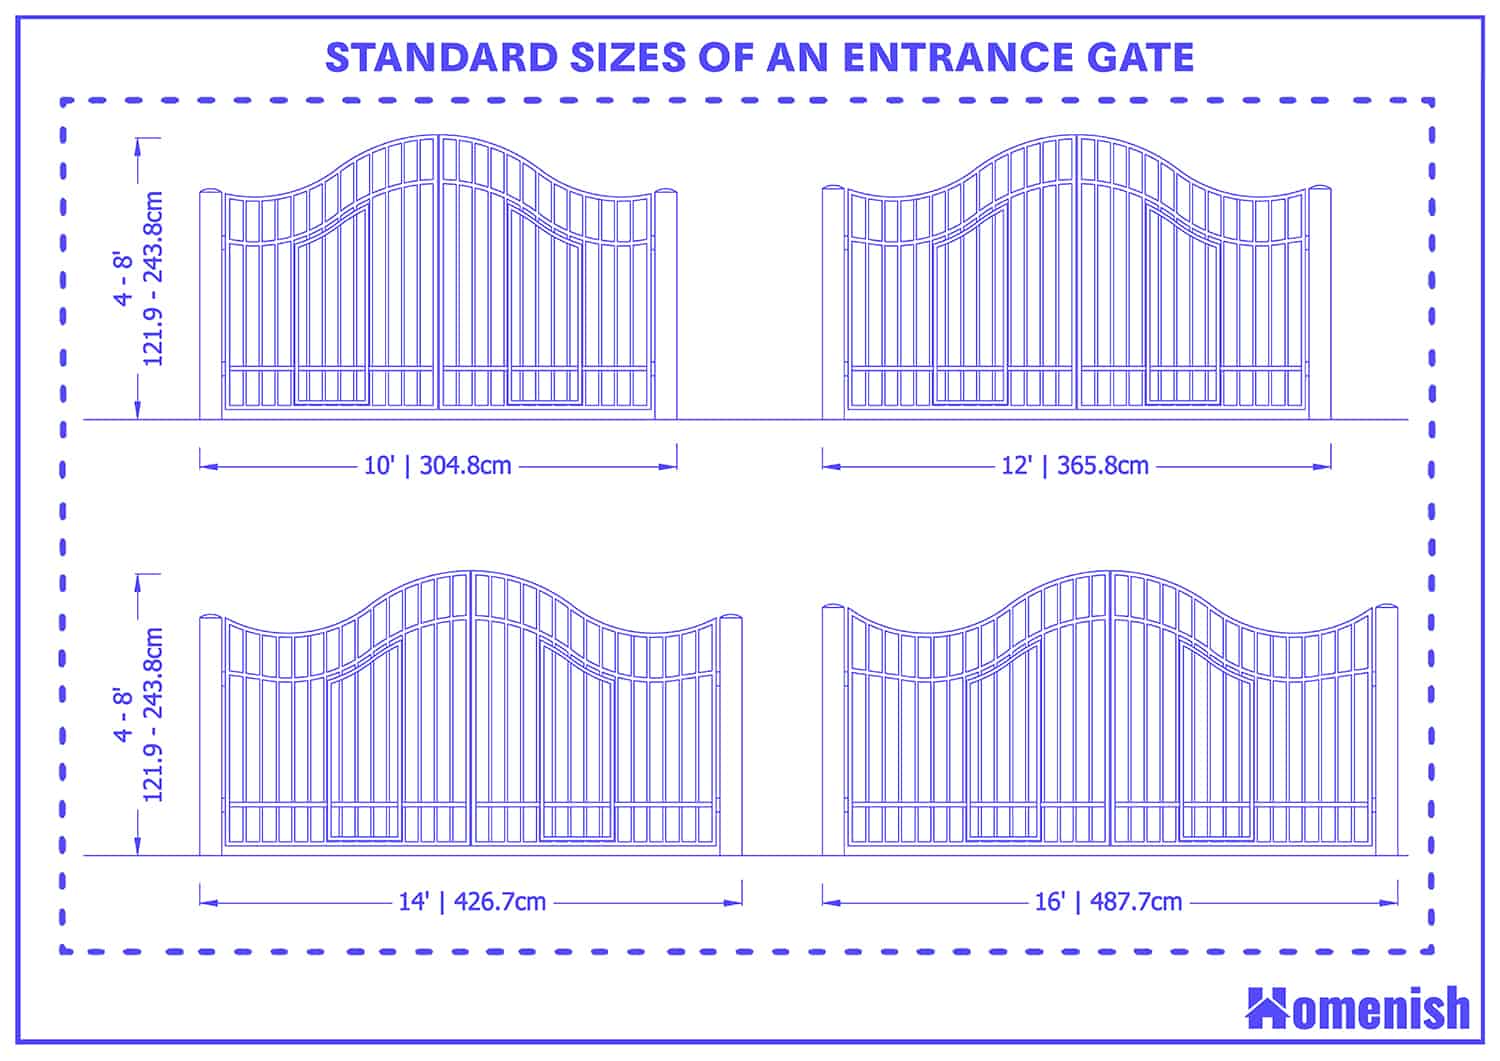 Standard sizes of an entrance gate